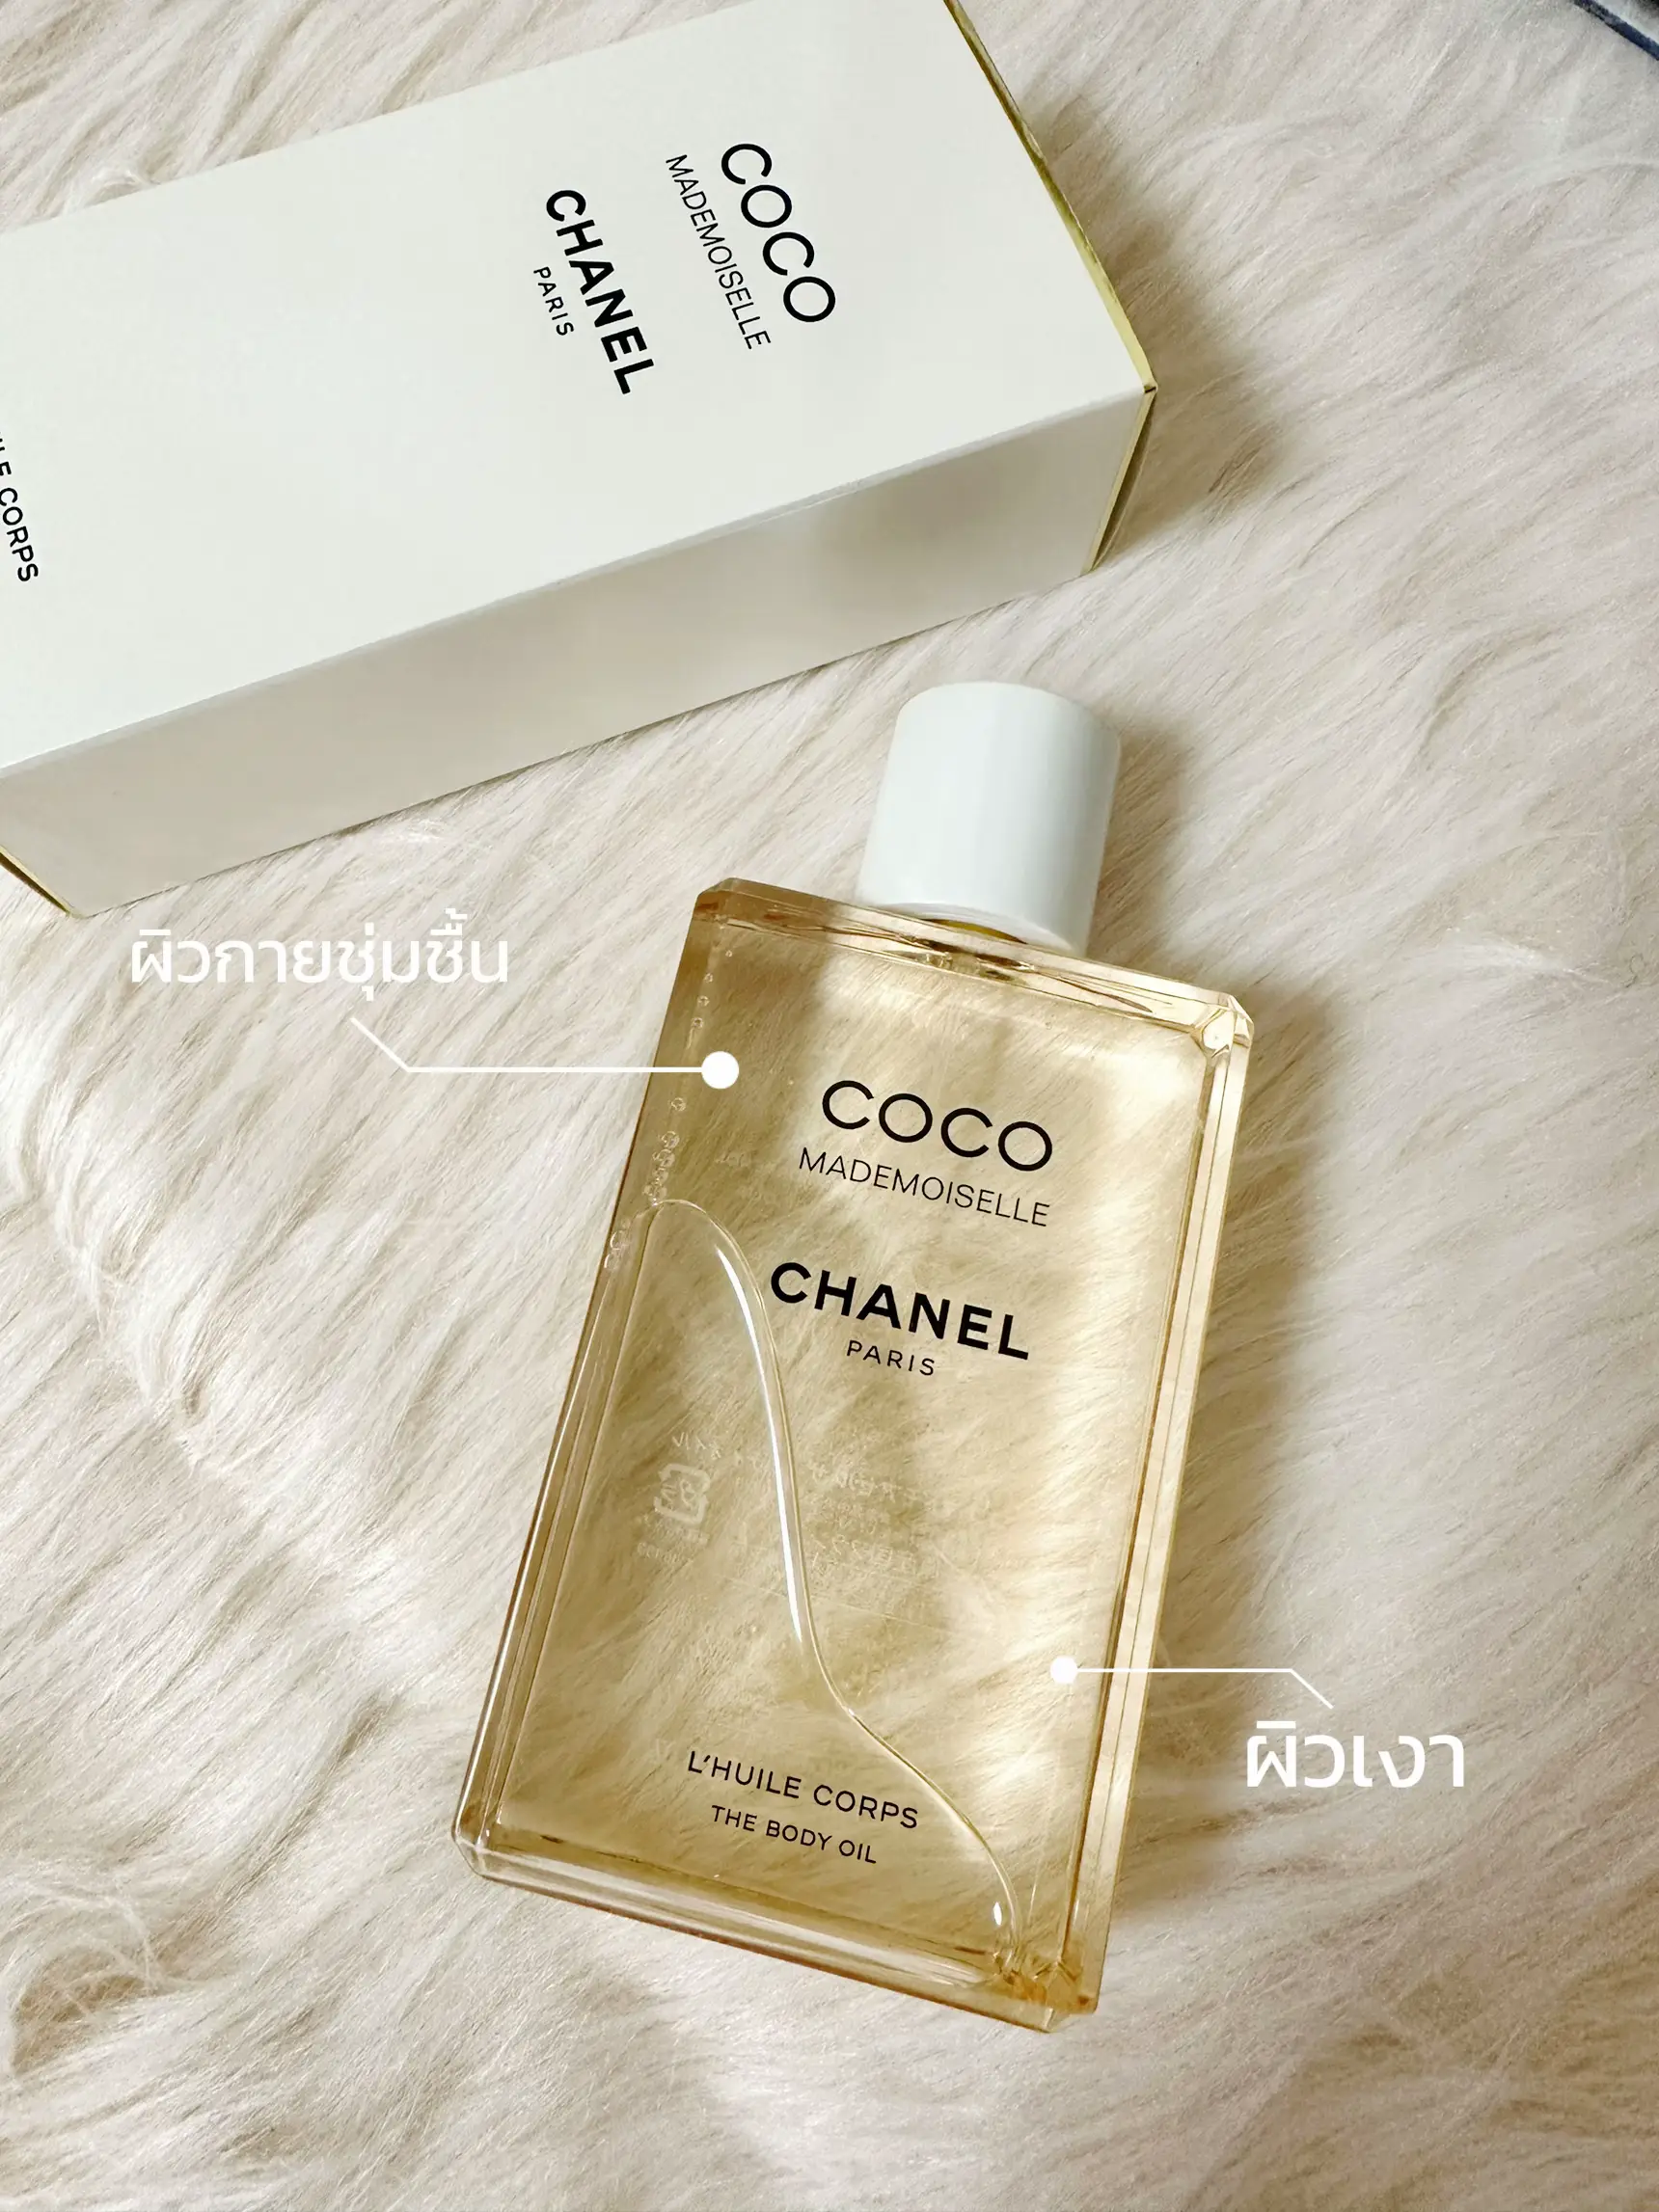 🎗️COCO MADEMOISELLE (Body Oil, good to buy?)